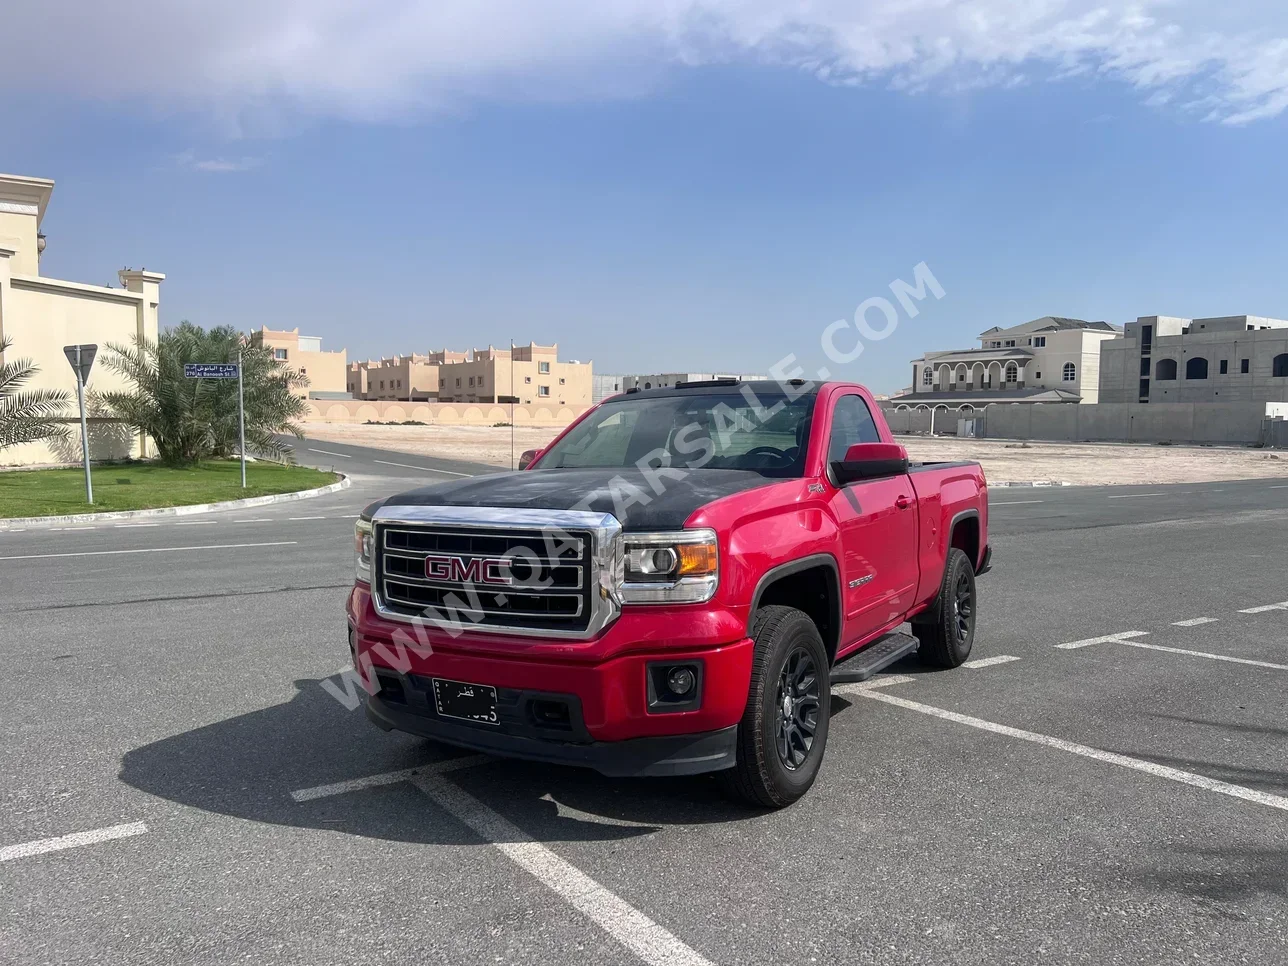  GMC  Sierra  1500  2014  Automatic  216,000 Km  8 Cylinder  Four Wheel Drive (4WD)  Pick Up  Red  With Warranty